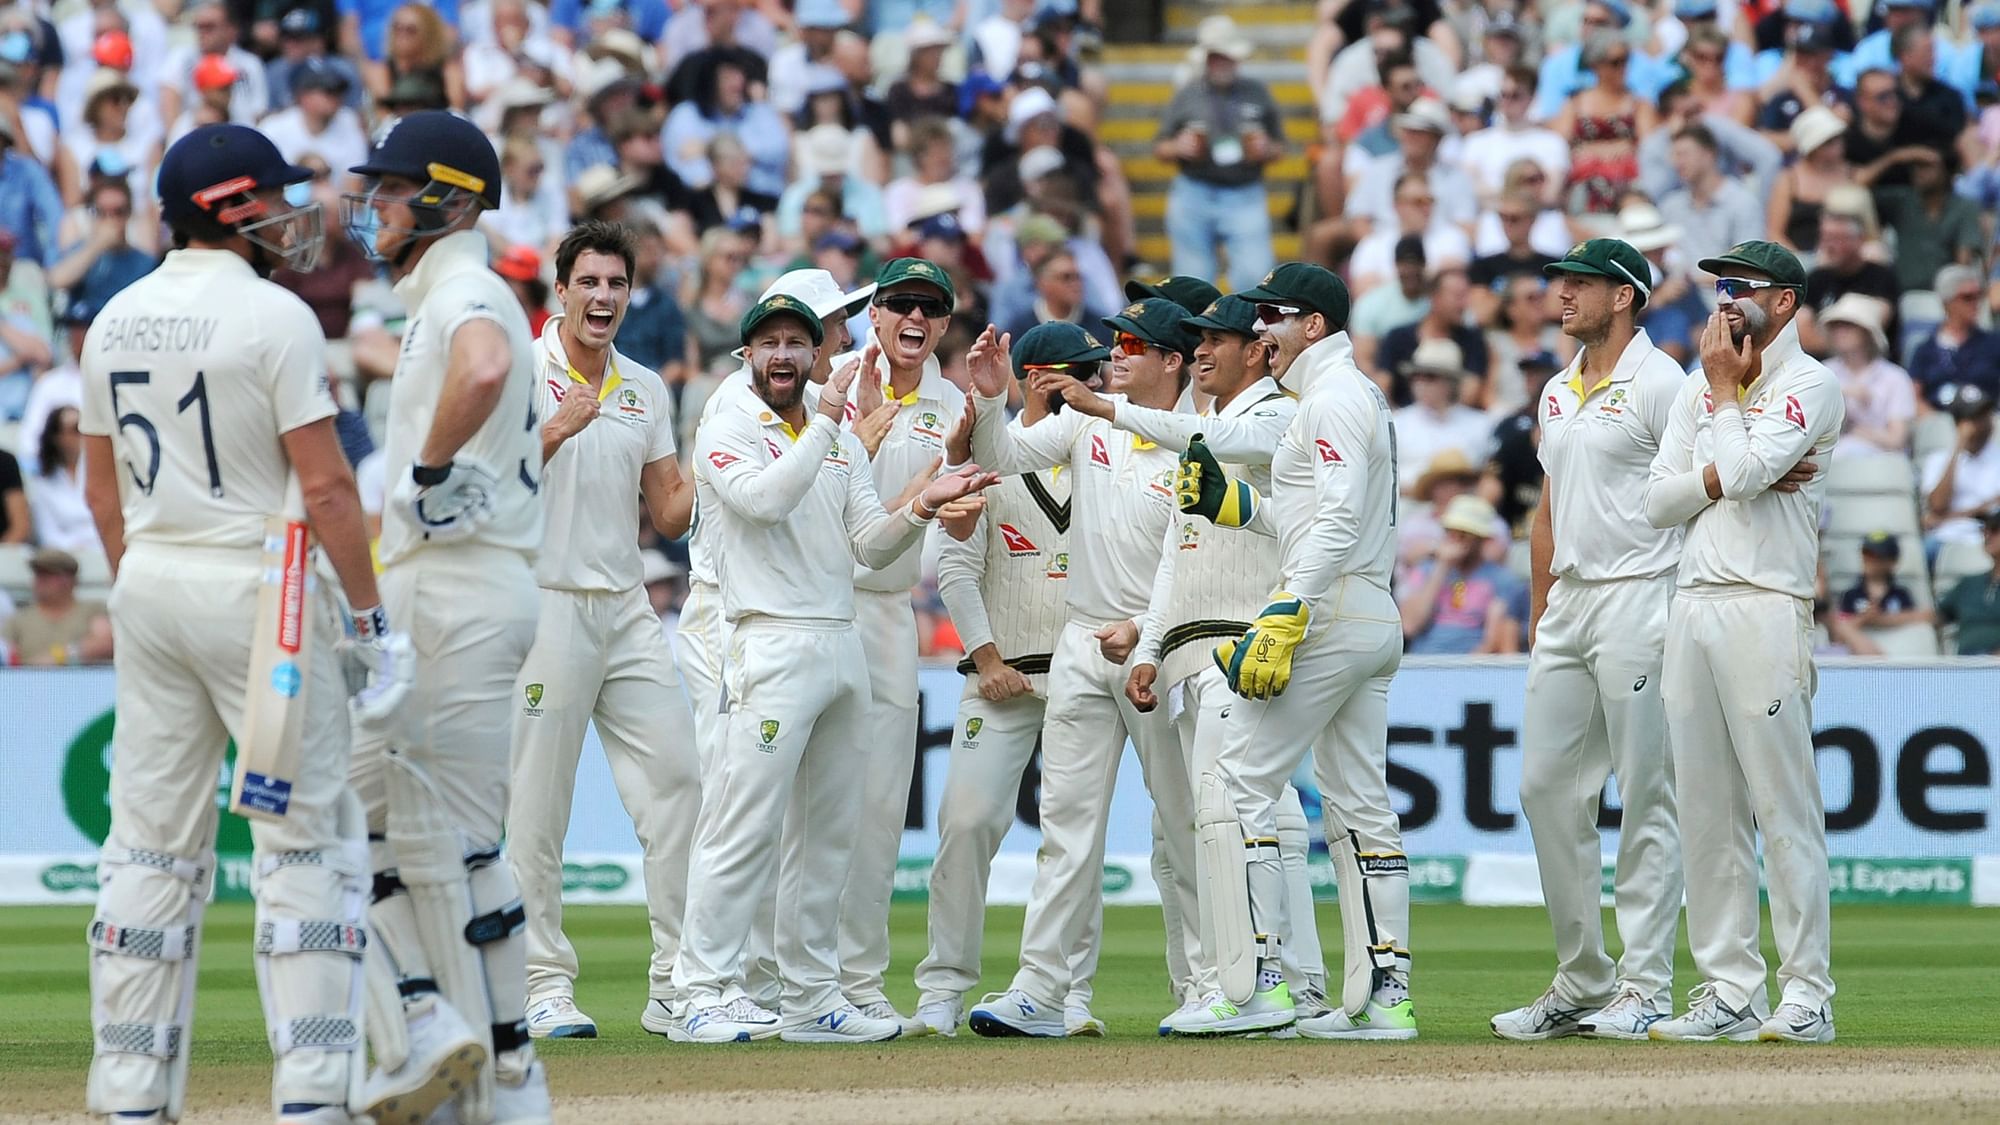 Australia players celebrate after a review confirms the dismissal of England’s Jonny Bairstow during day five of the first Ashes Test cricket match between England and Australia at Edgbaston in Birmingham, England, Monday Aug. 5, 2019.